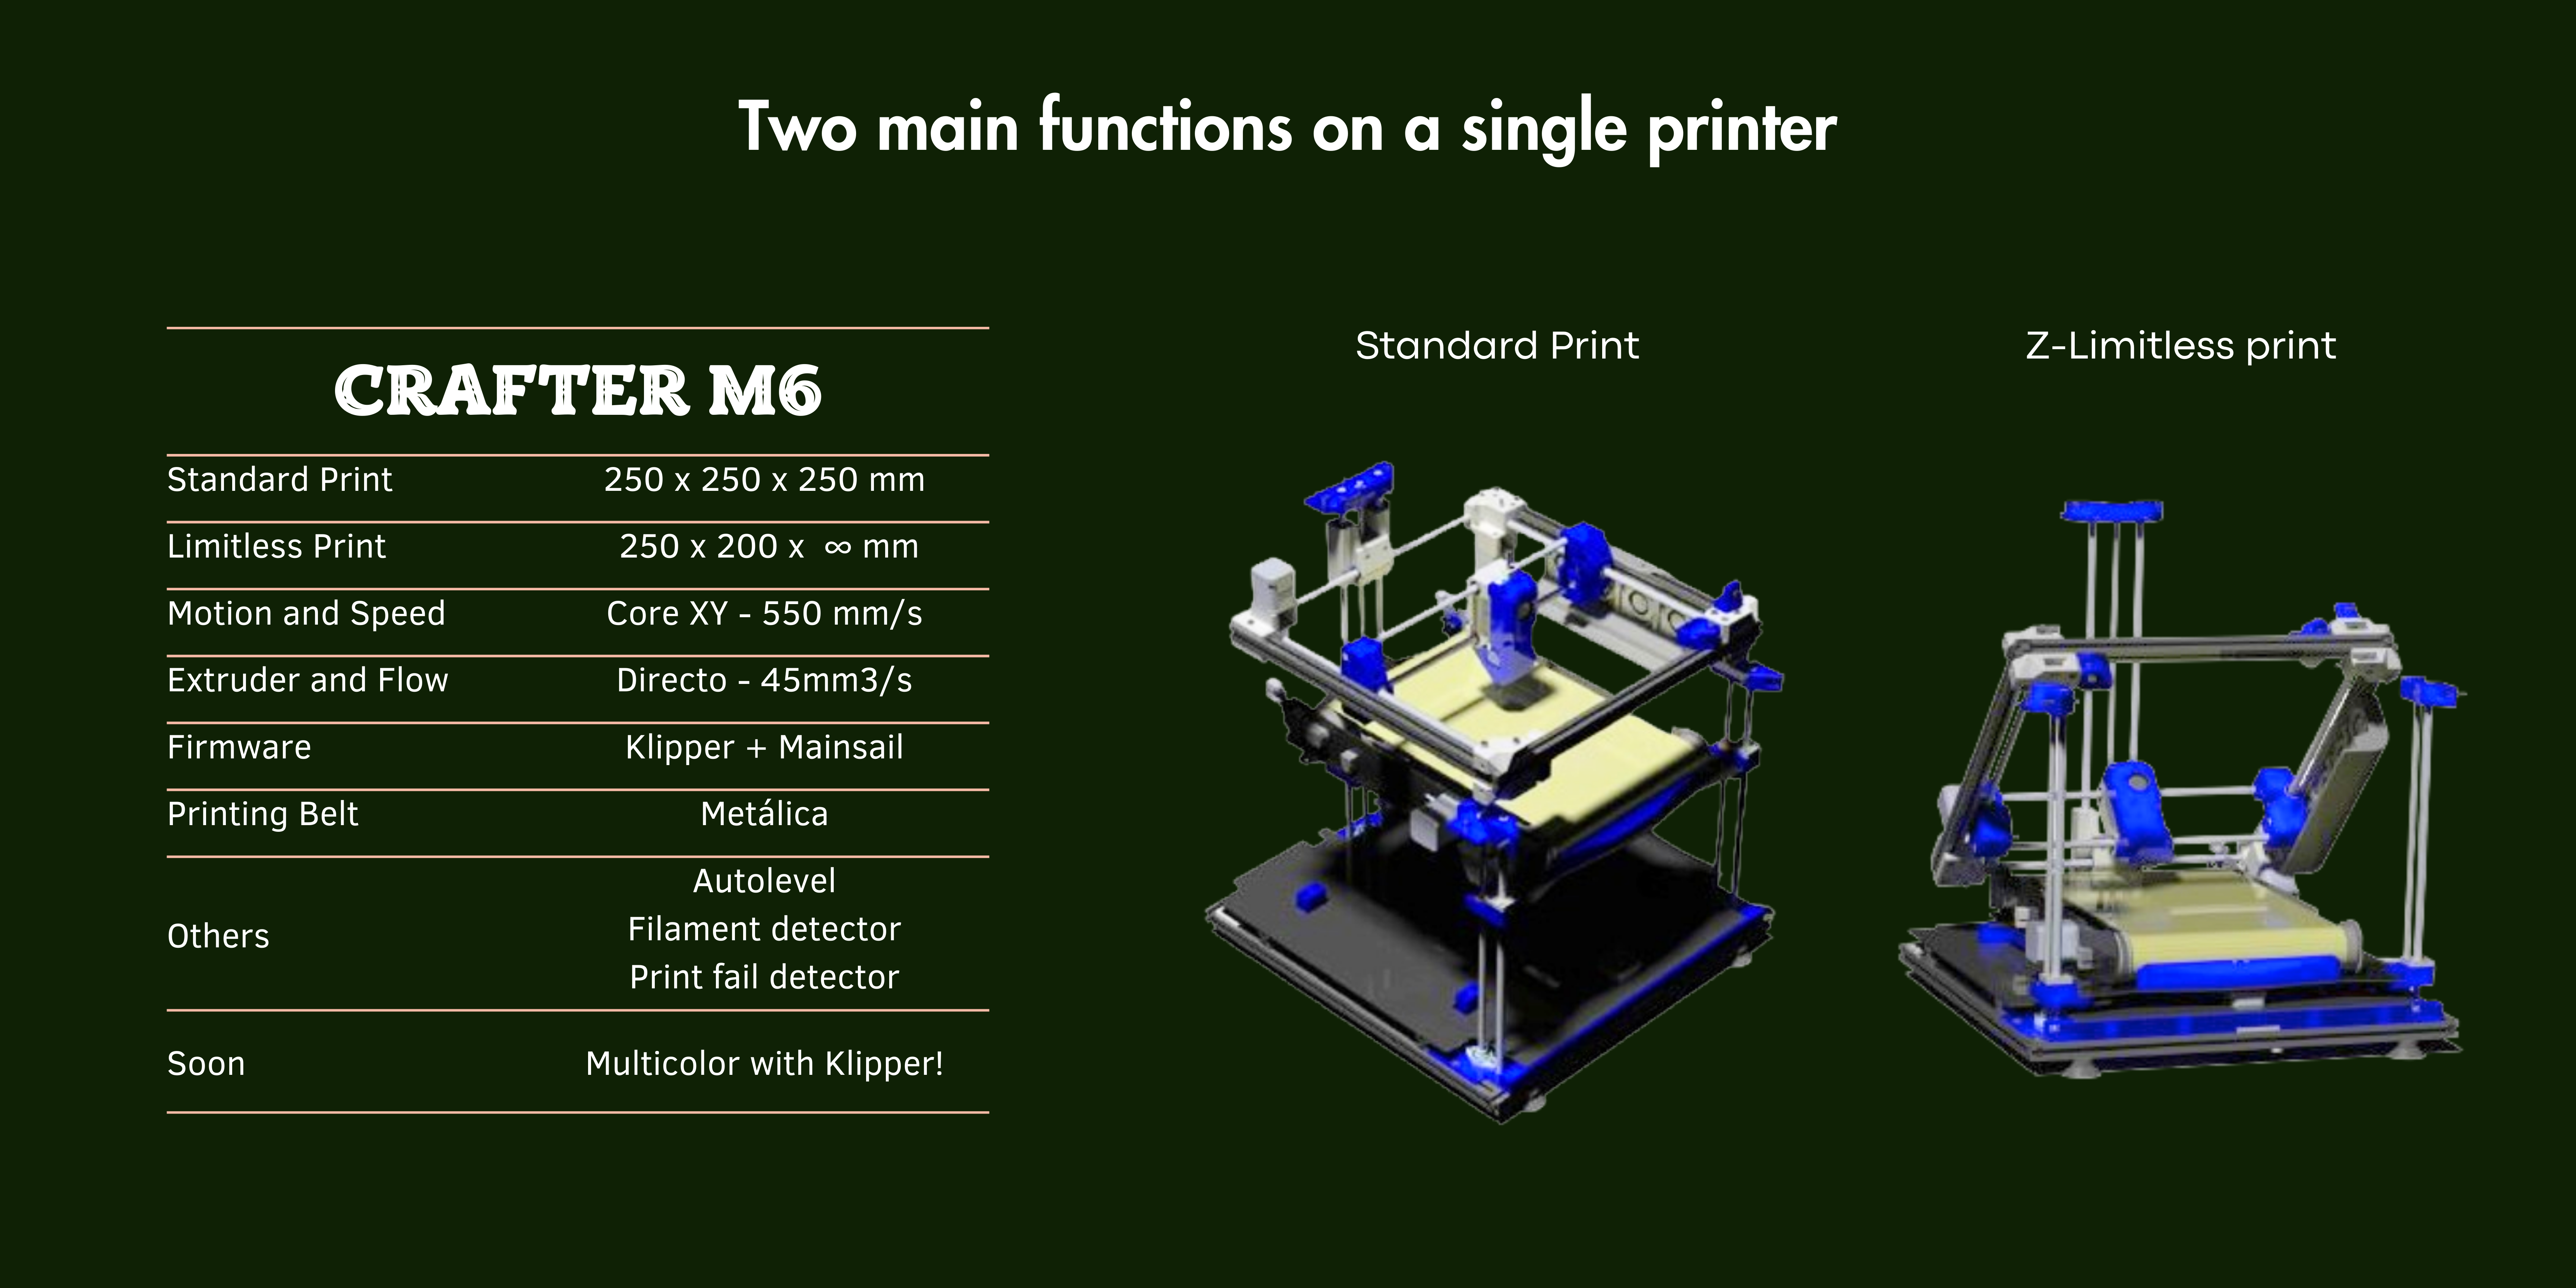 Two main functions on a single printer